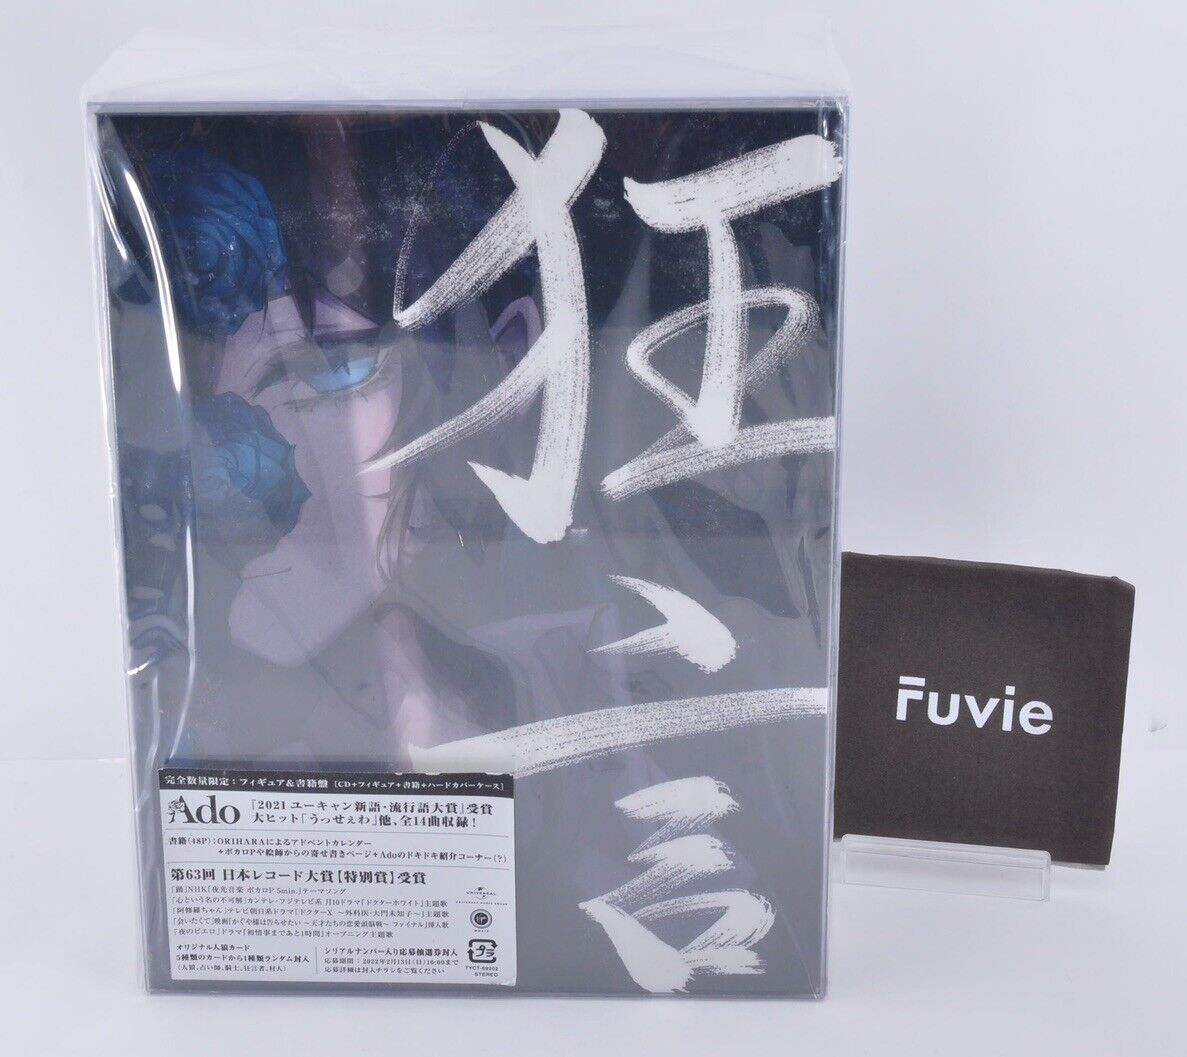 Ado Kyogen with figure Limited Edition CD + figure + book board Japan